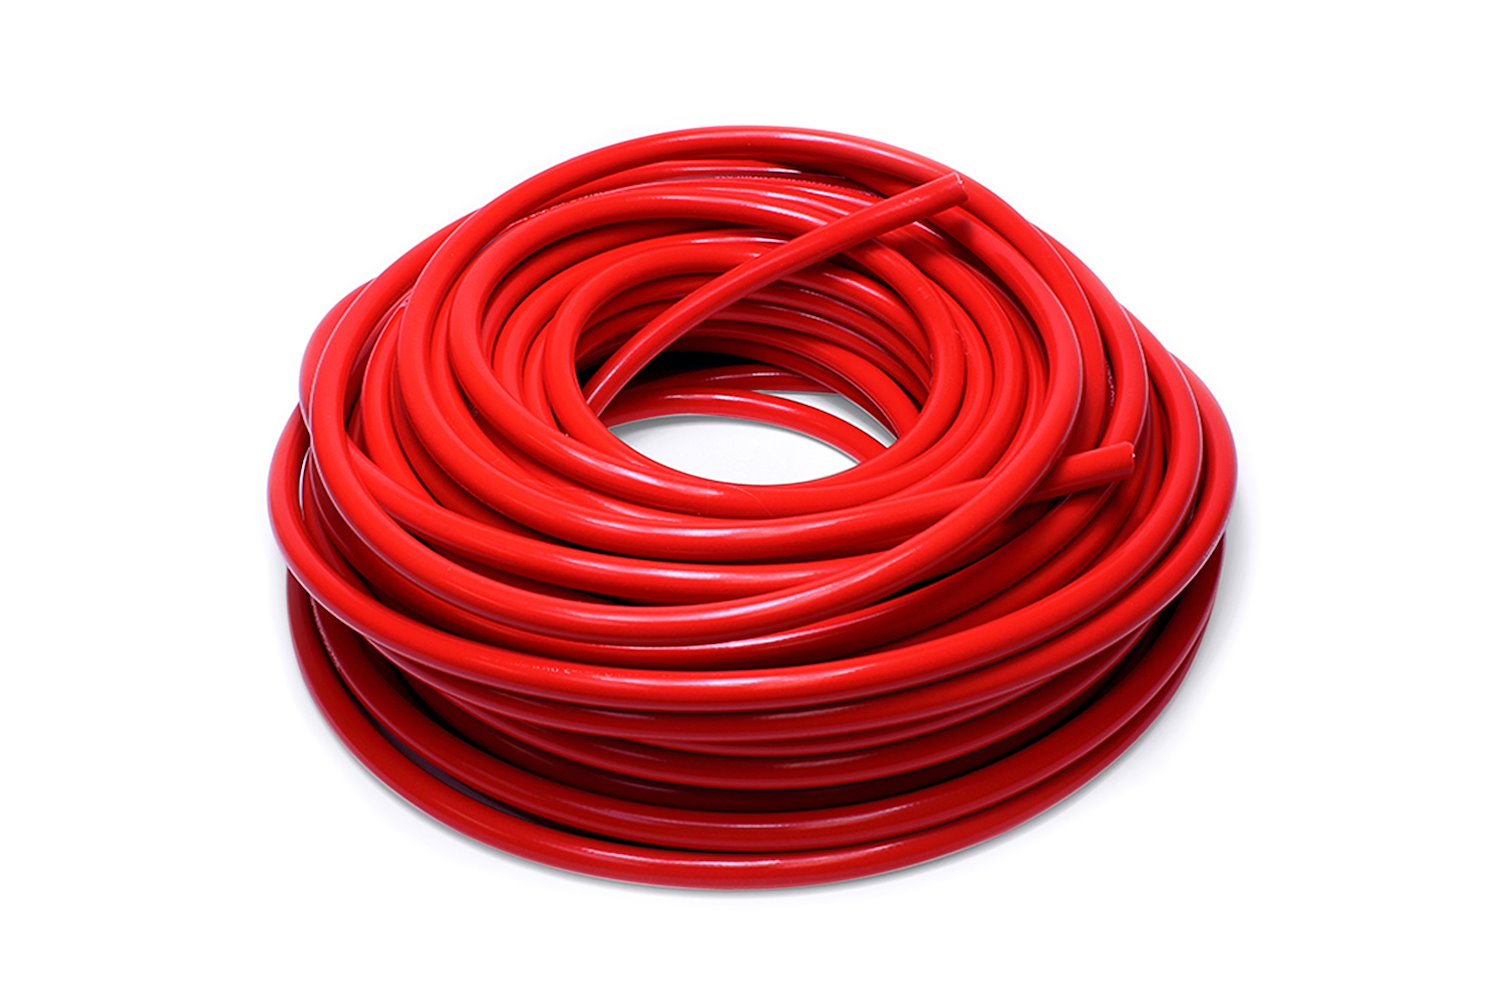 HTHH-038-REDx50 Silicone Heater Hose Tubing, High-Temp 1-Ply Reinforced, 3/8 in. ID, 50 ft. Roll, Red